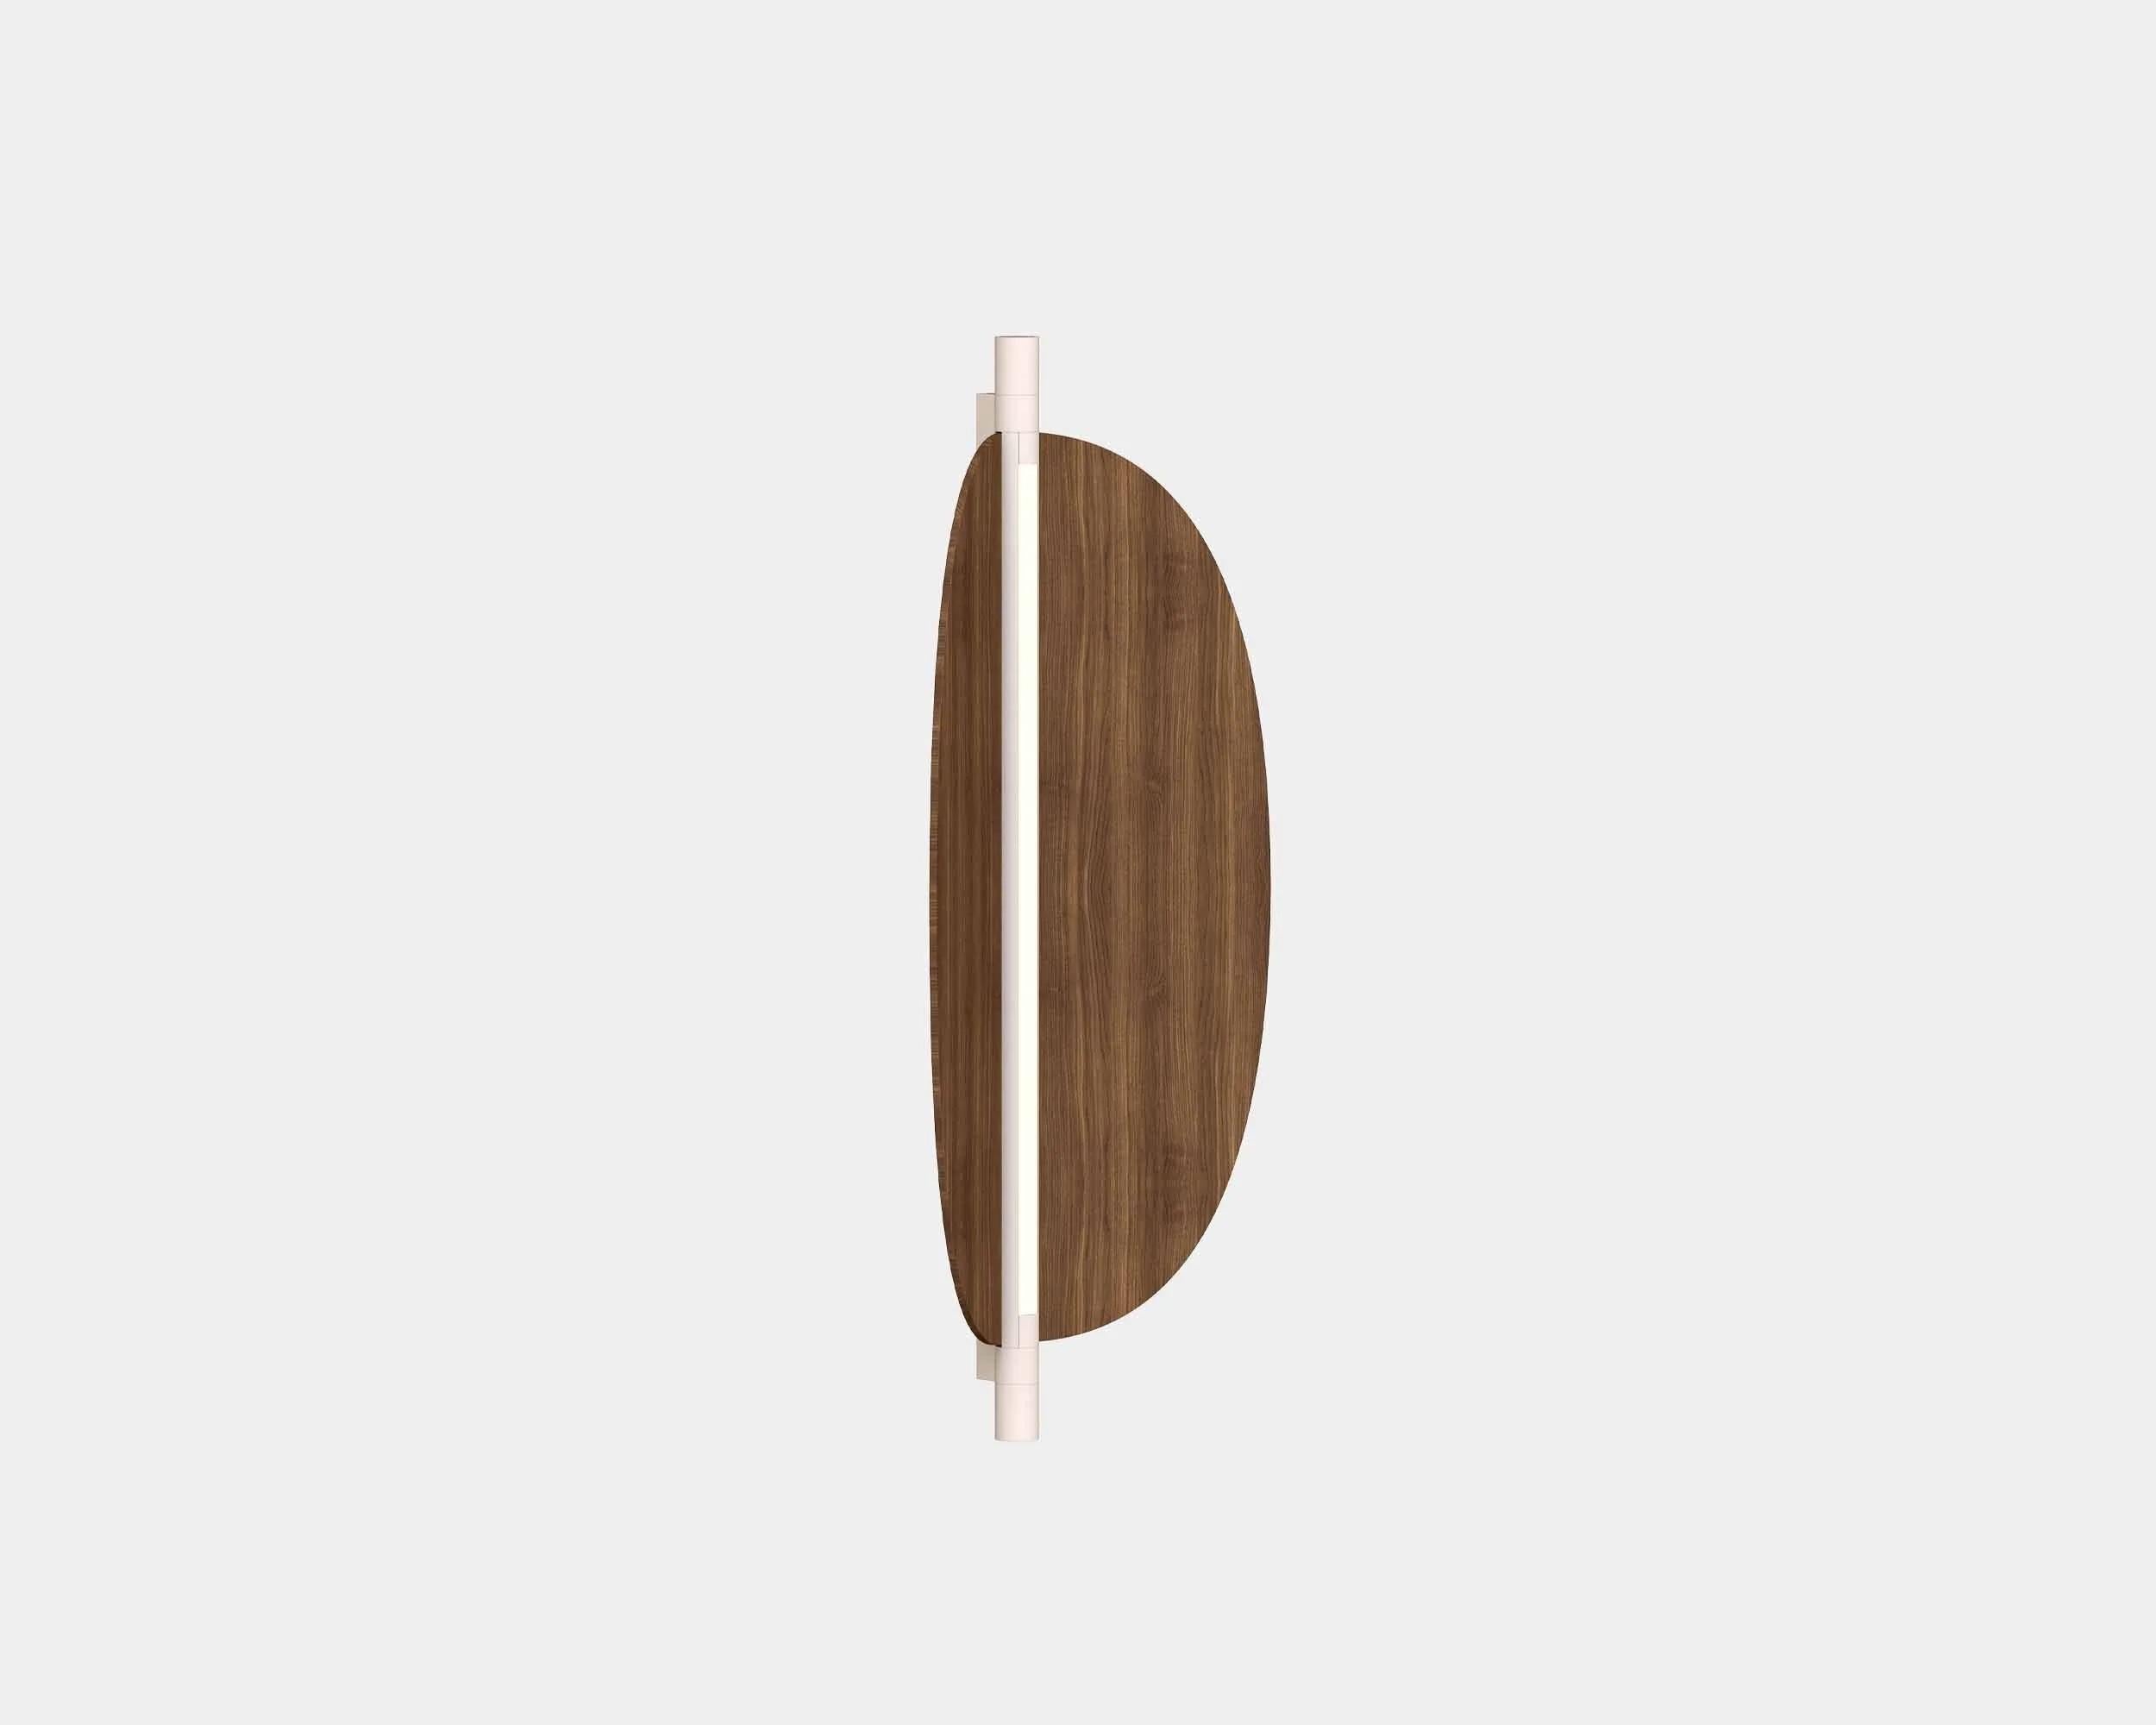 Contemporary Wall Lamp 'Thula 562.42' by Federica Biasi x Tooy, Black + Walnut For Sale 4